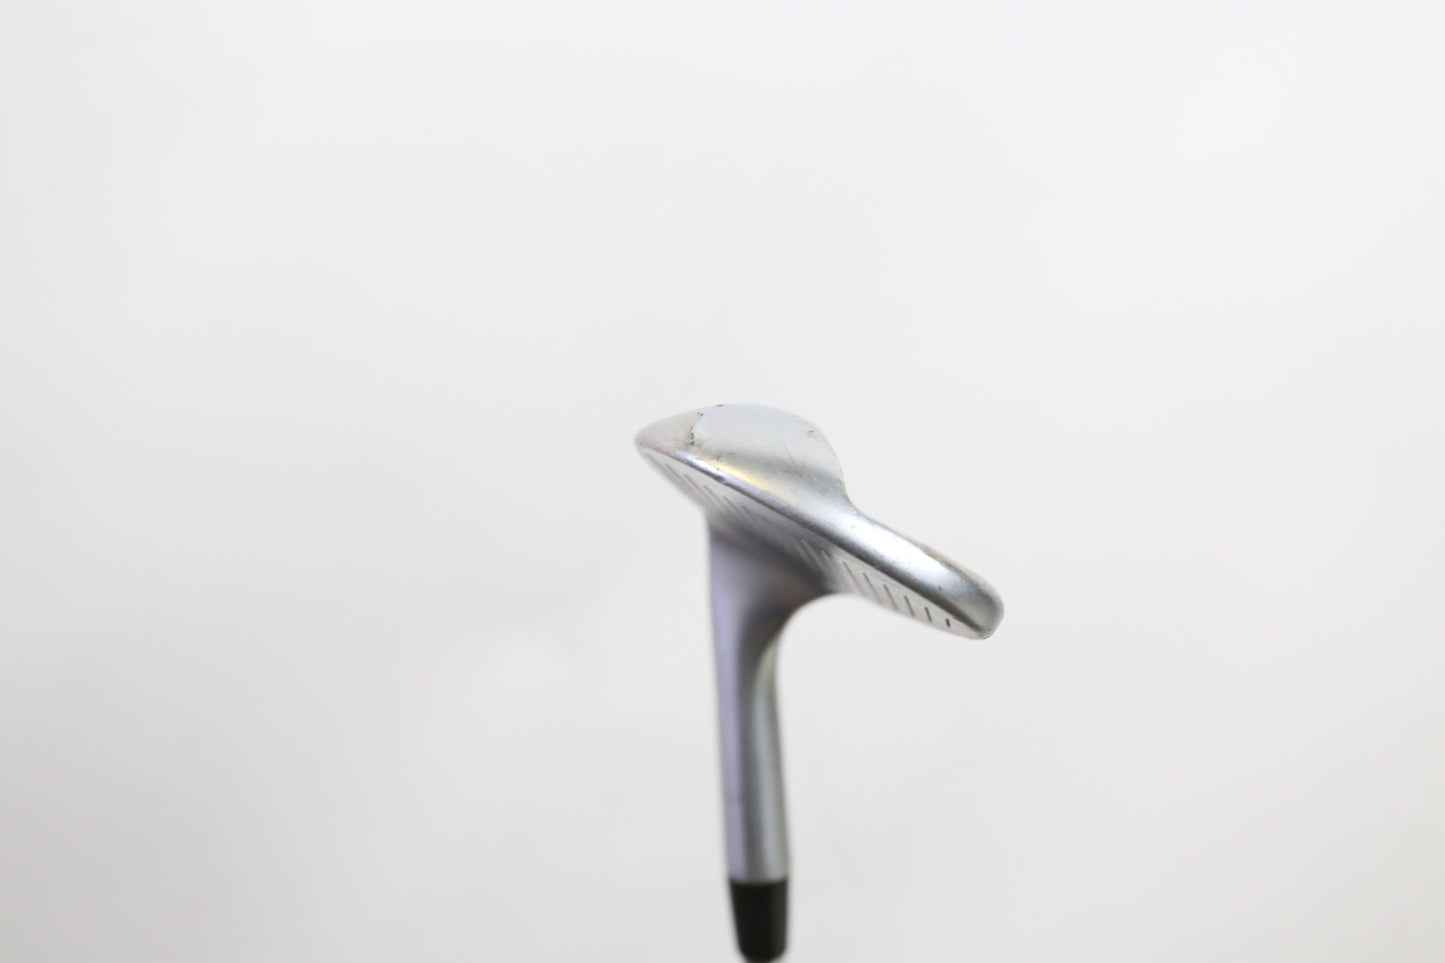 Used Ping Glide SS Lob Wedge - Right-Handed - 60 Degrees - Stiff Flex